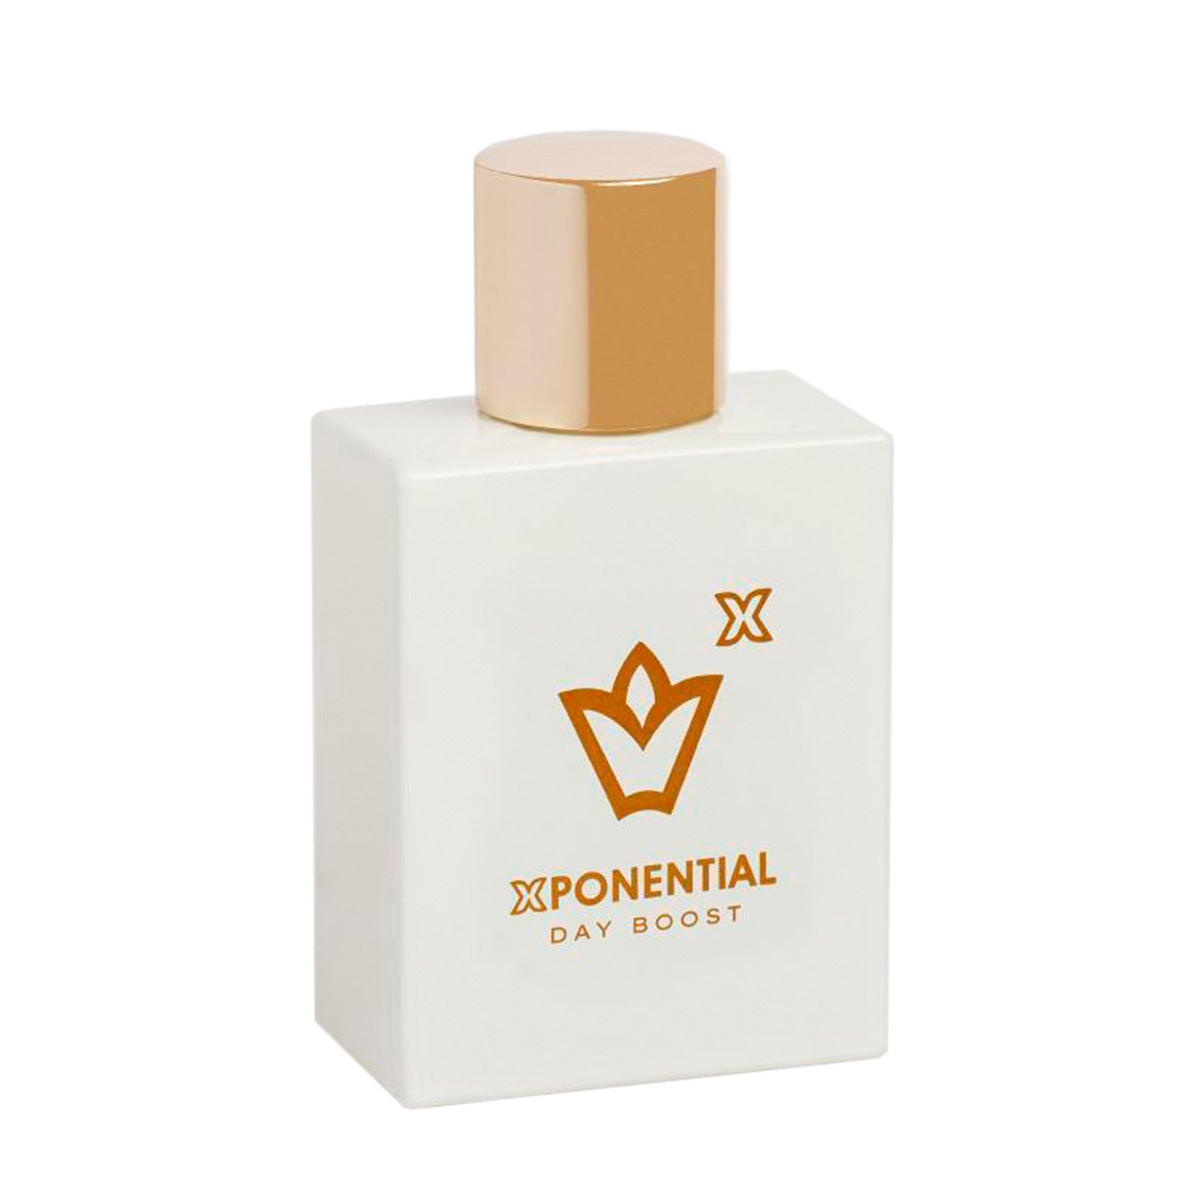 Day Boost - Xponential Boost - 50ml